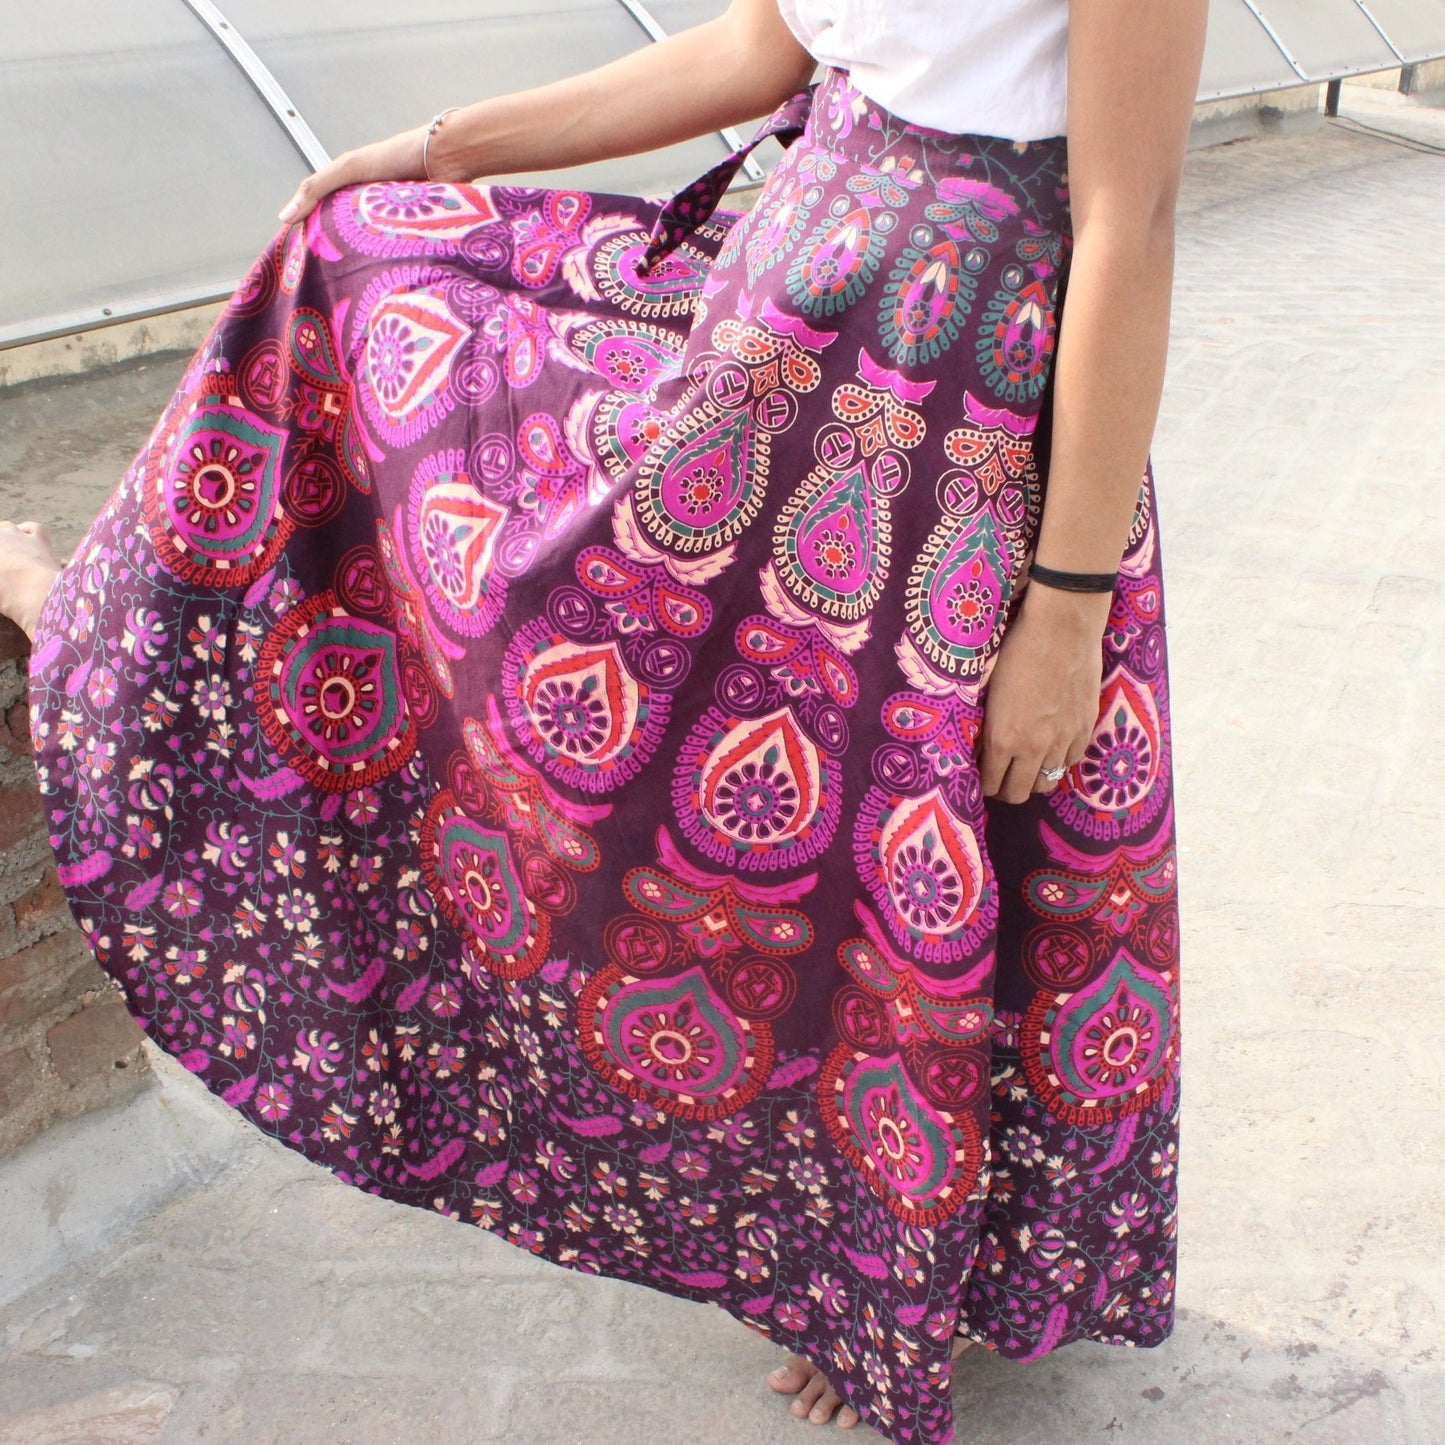 Handmade Festival Skirt Home Outfit Hippie Skirt Fairy Skirt Touch of Boho-Chic to Your Wardrobe with this Gypsy-Inspired Clothing Skirt